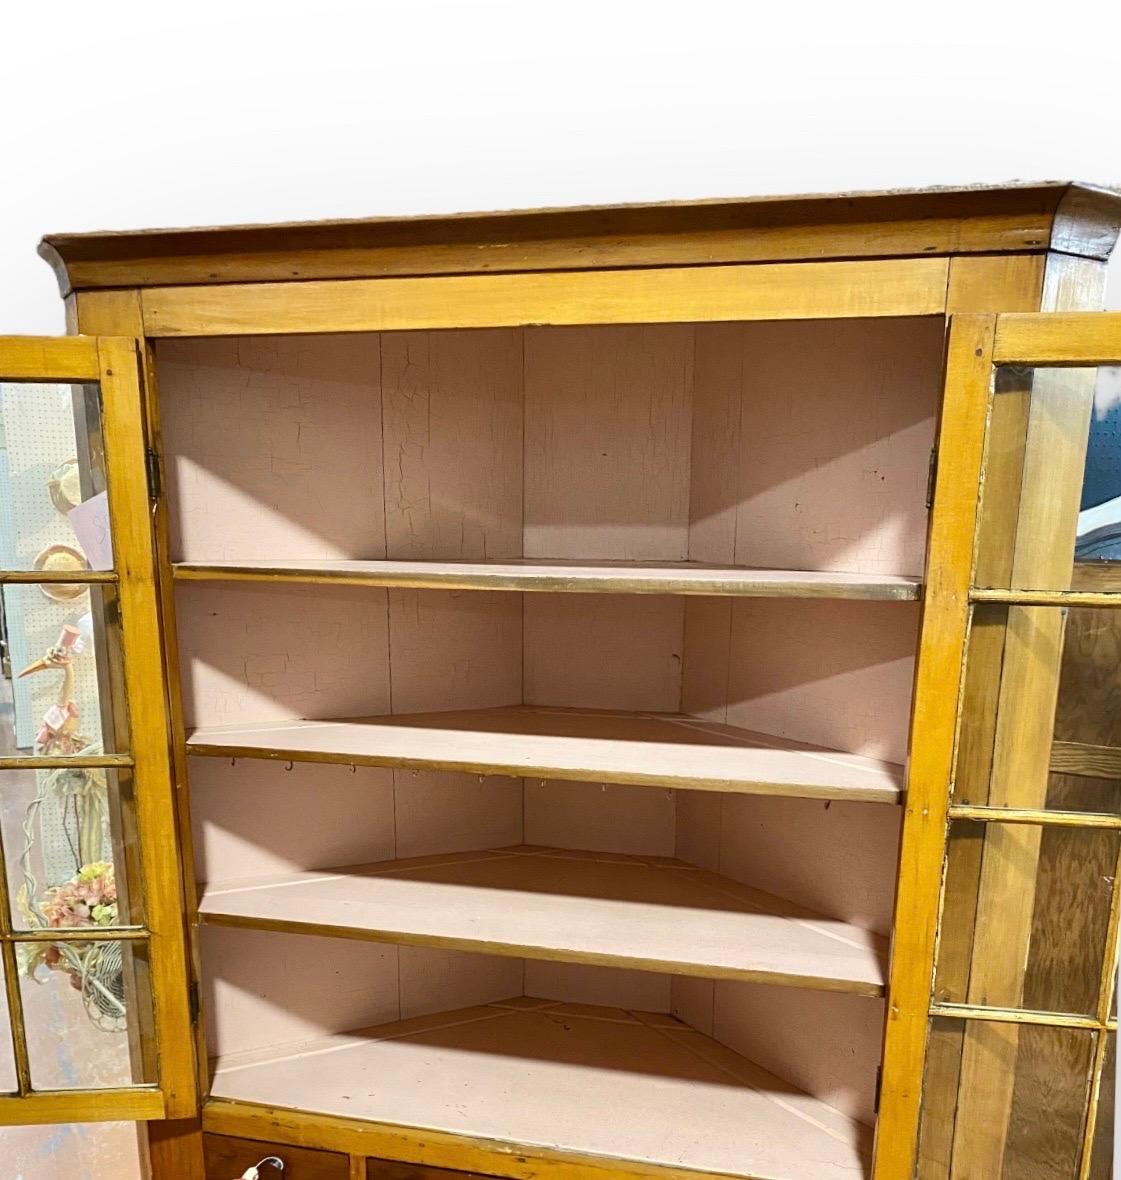 Antique early 19th century American pine and maple Corner Cupboard, c 1810. Made of pine and maple, featuring triangular form with stunning original glazed wavy glass doors, three drawers and wood doors below This cupboard has pale pink old milk